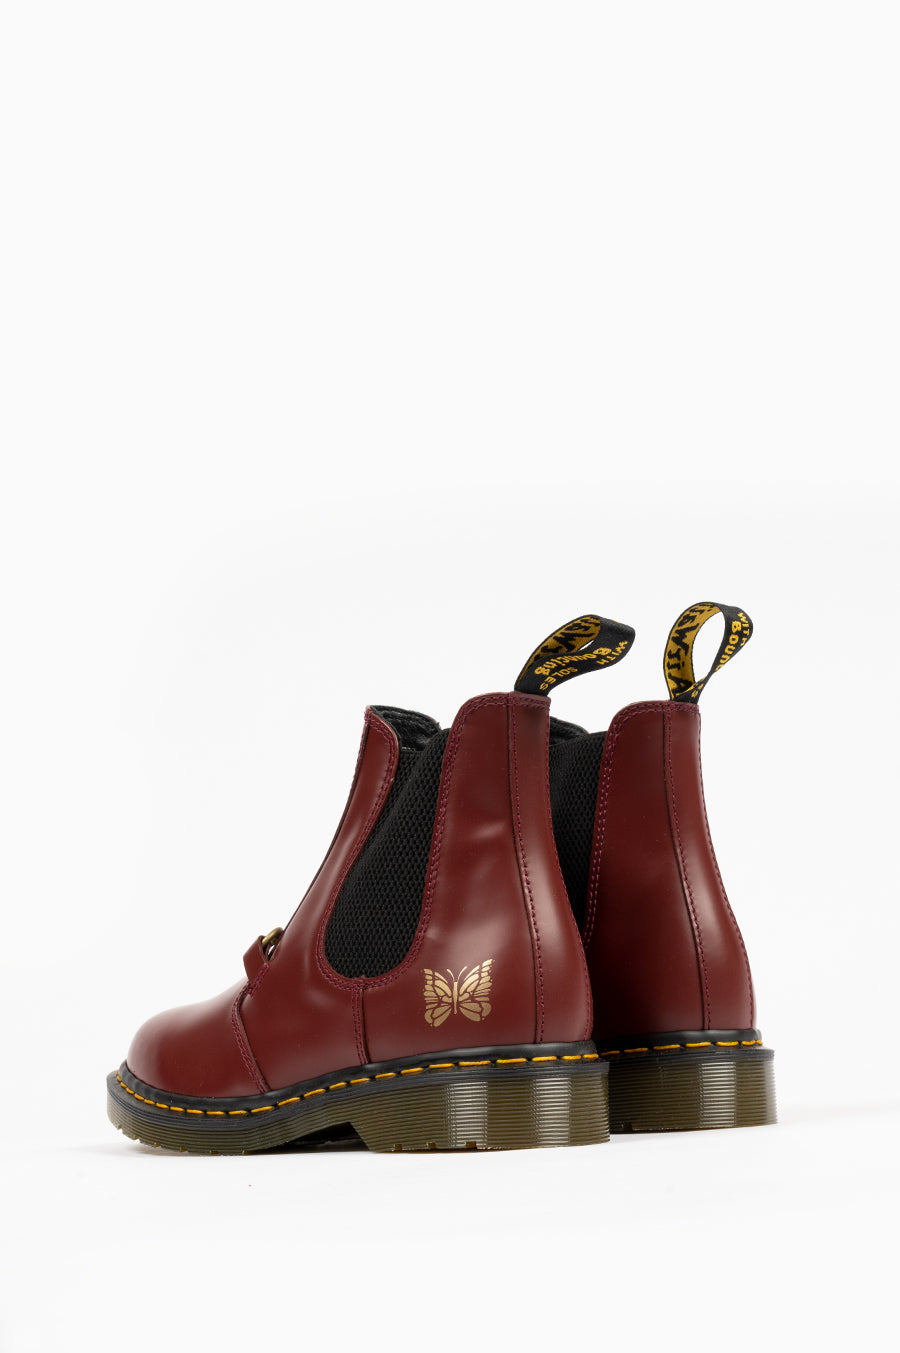 DR MARTENS 2976 SNAFFLE NEEDLES CHERRY RED SMOOTH